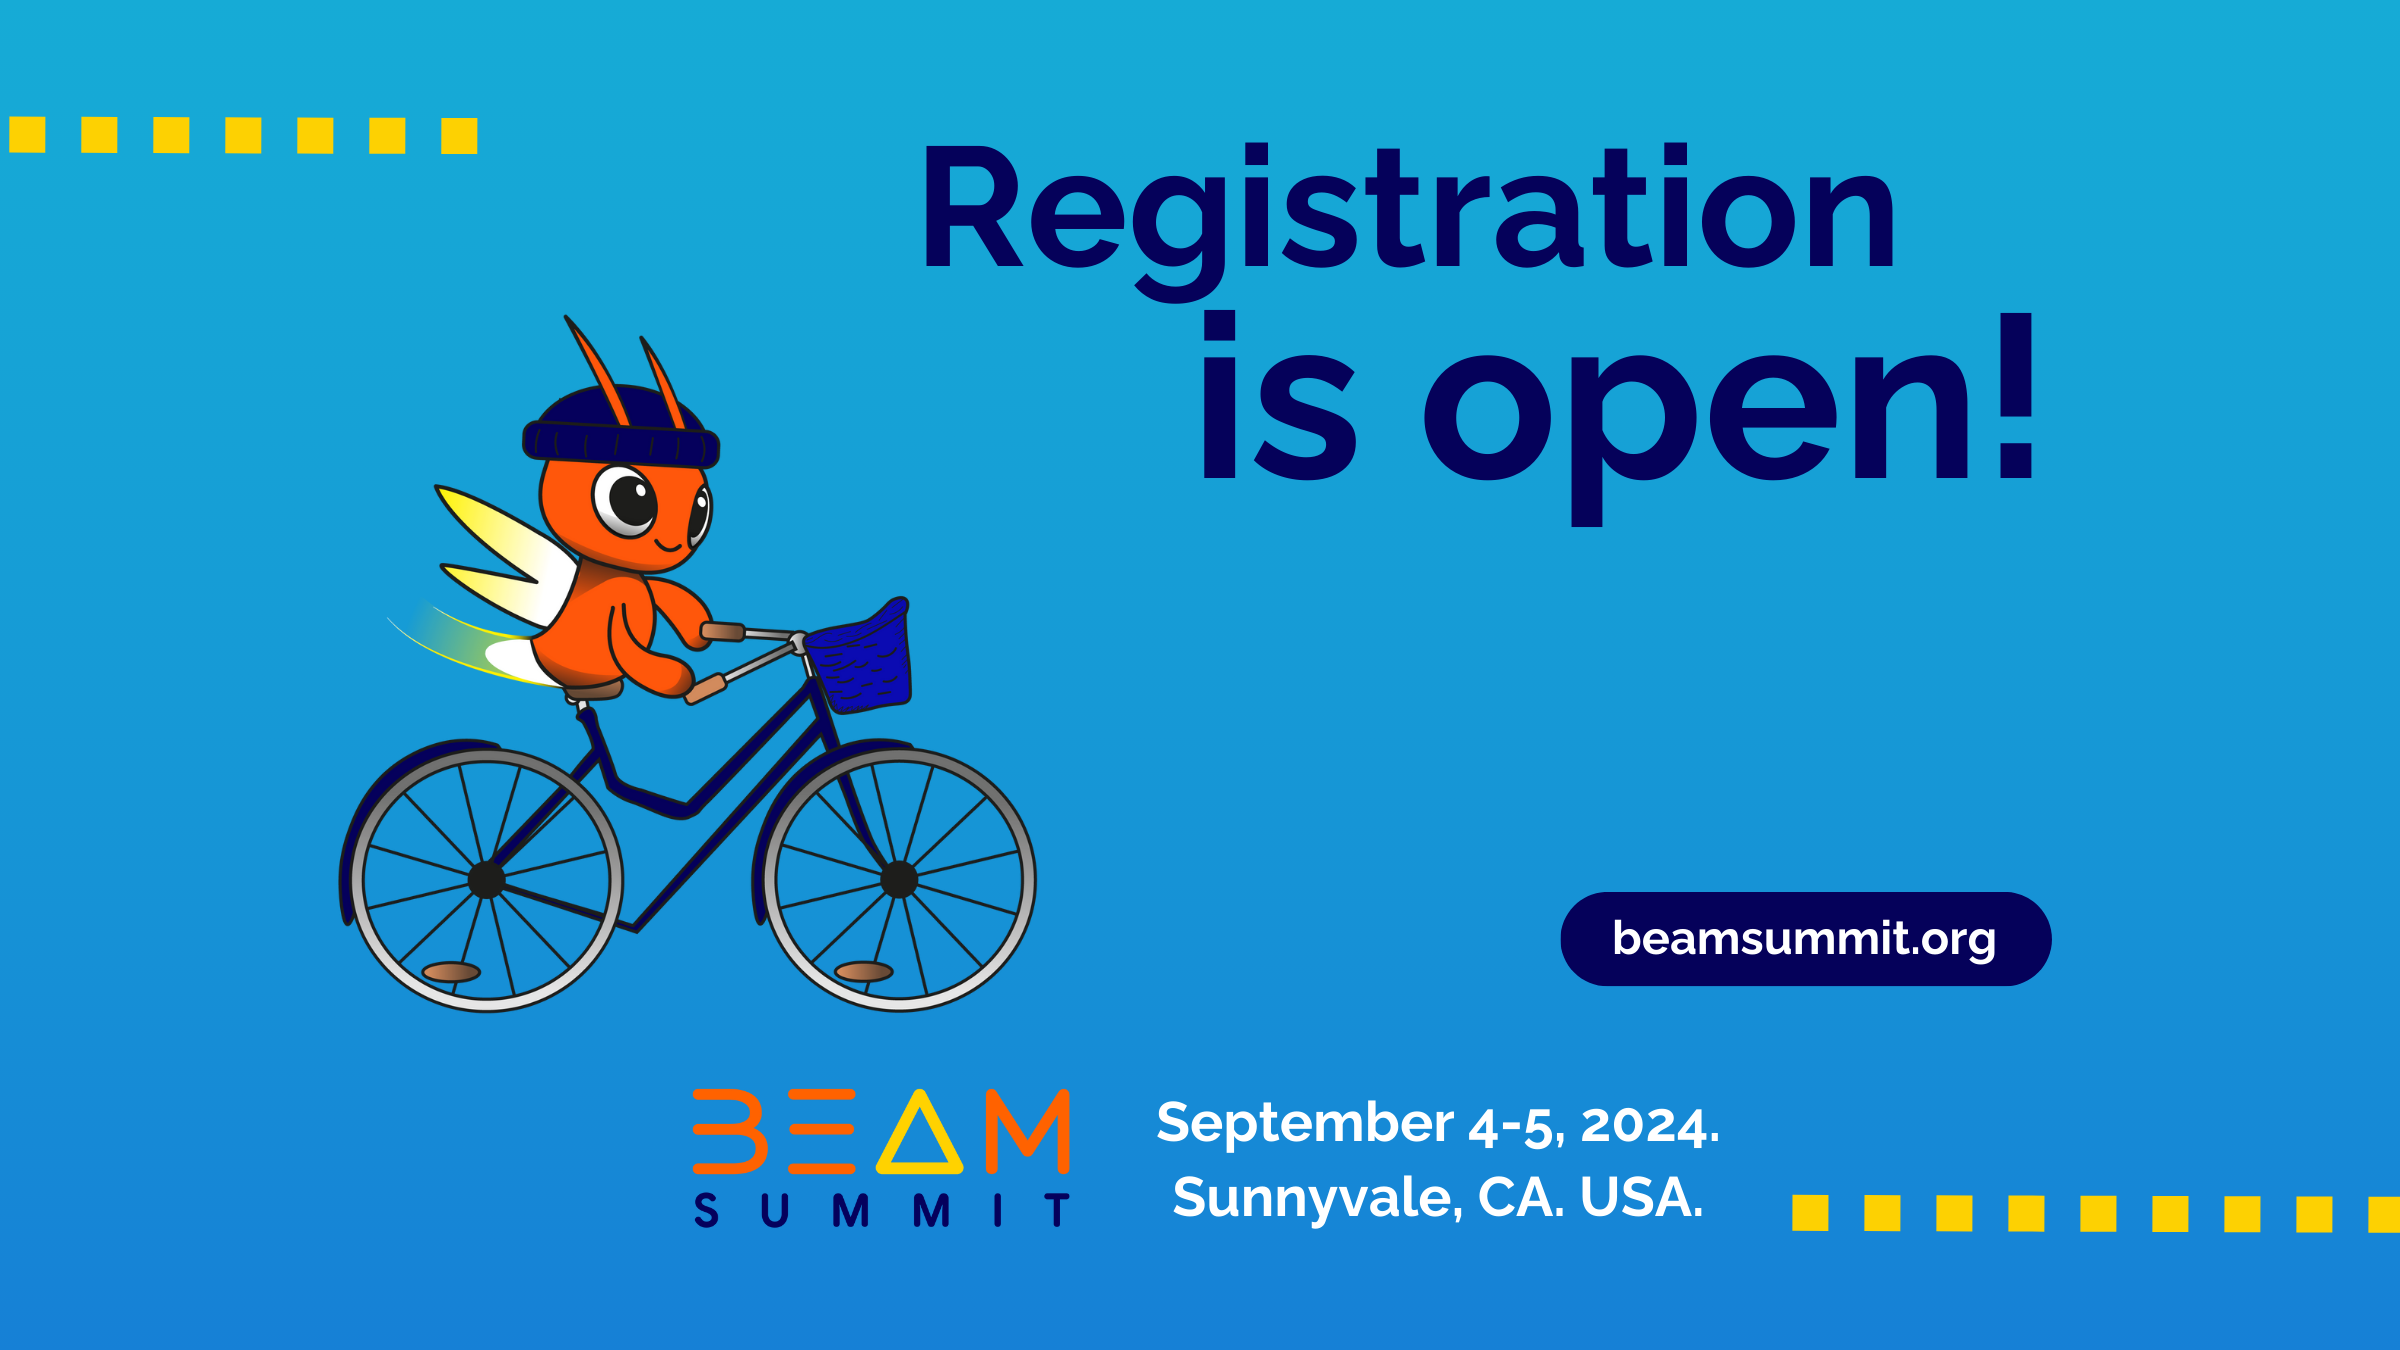 Registration for Beam Summit 2024 is open!